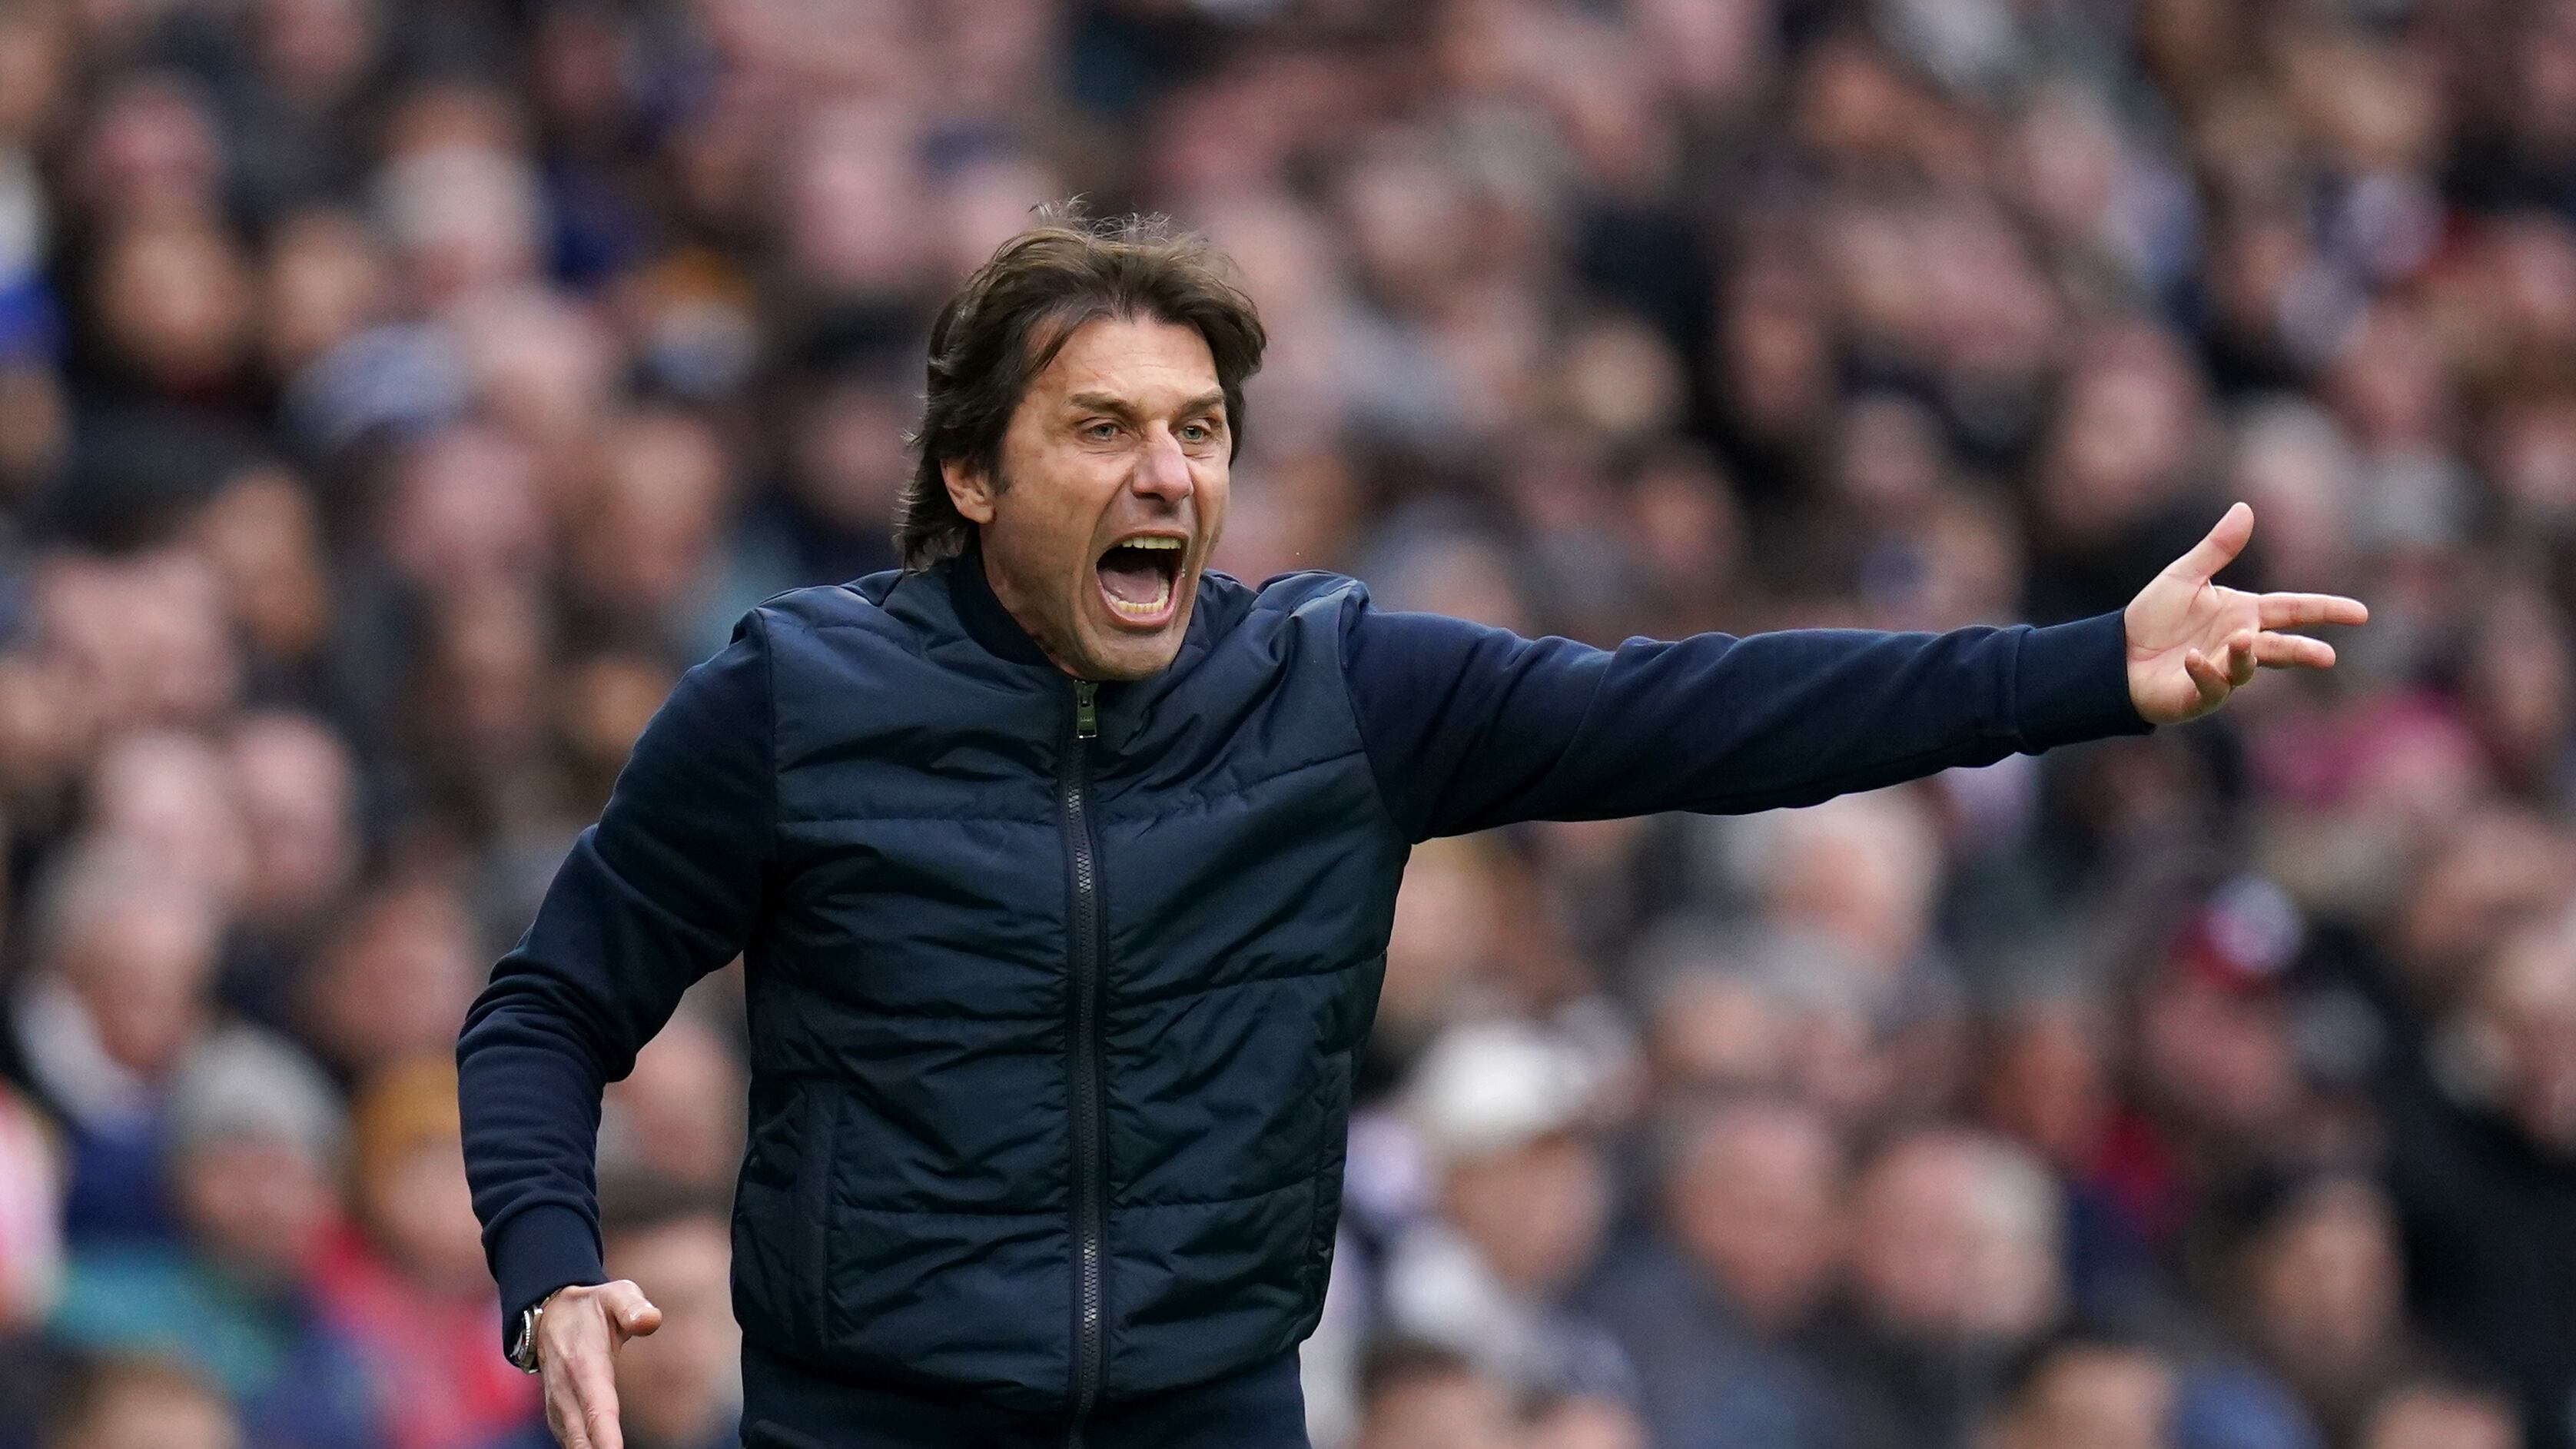 Former Chelsea and Tottenham boss Antonio Conte has been appointed as Napoli’s head coach